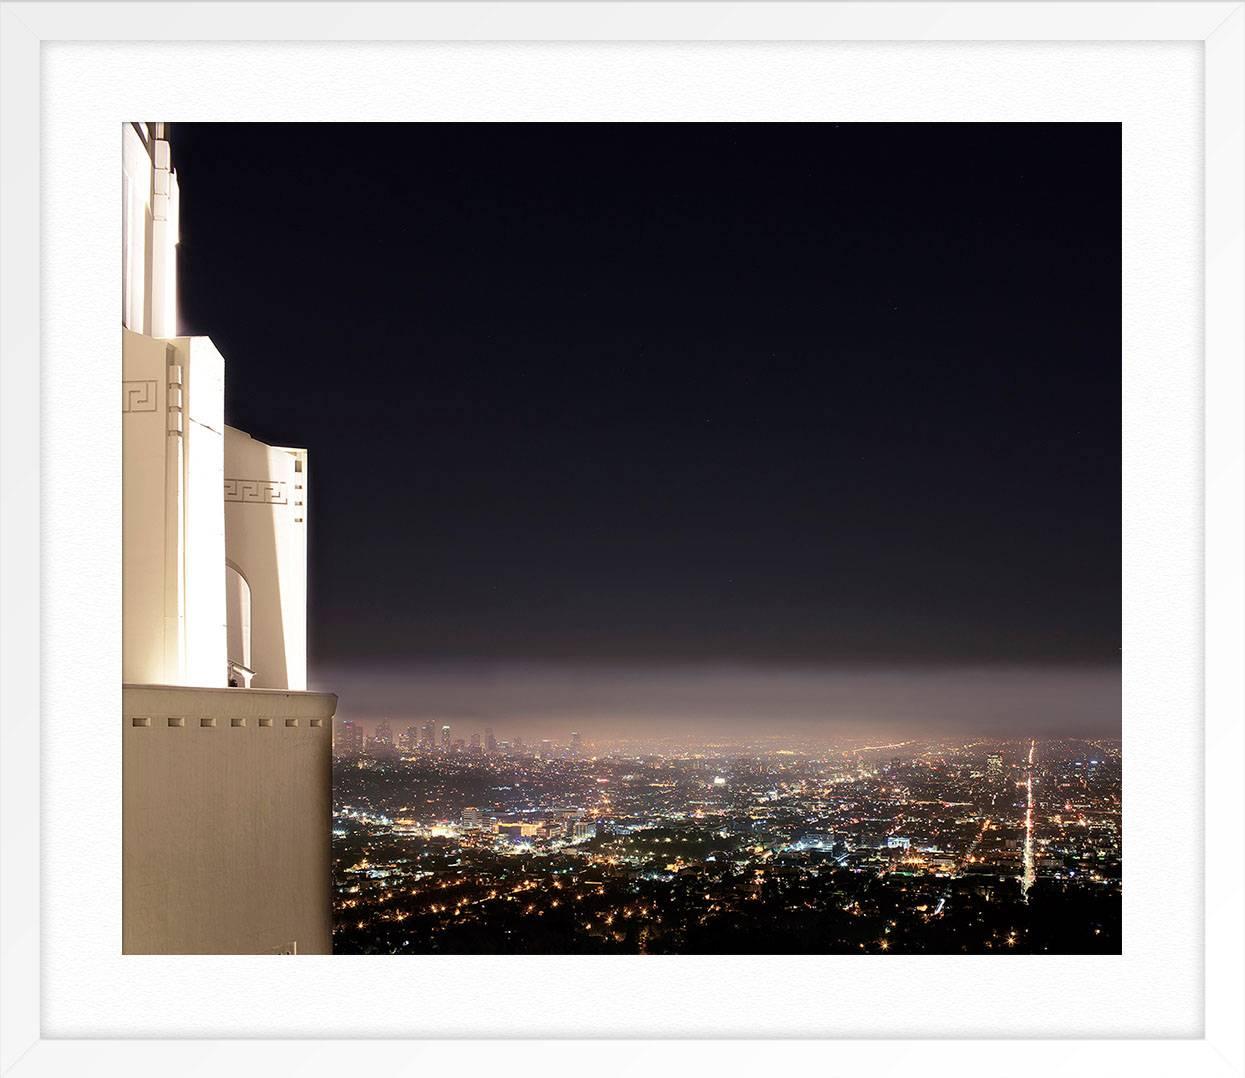 Los Angeles, Griffith Observatory 2 - Black Landscape Print by Ludwig Favre